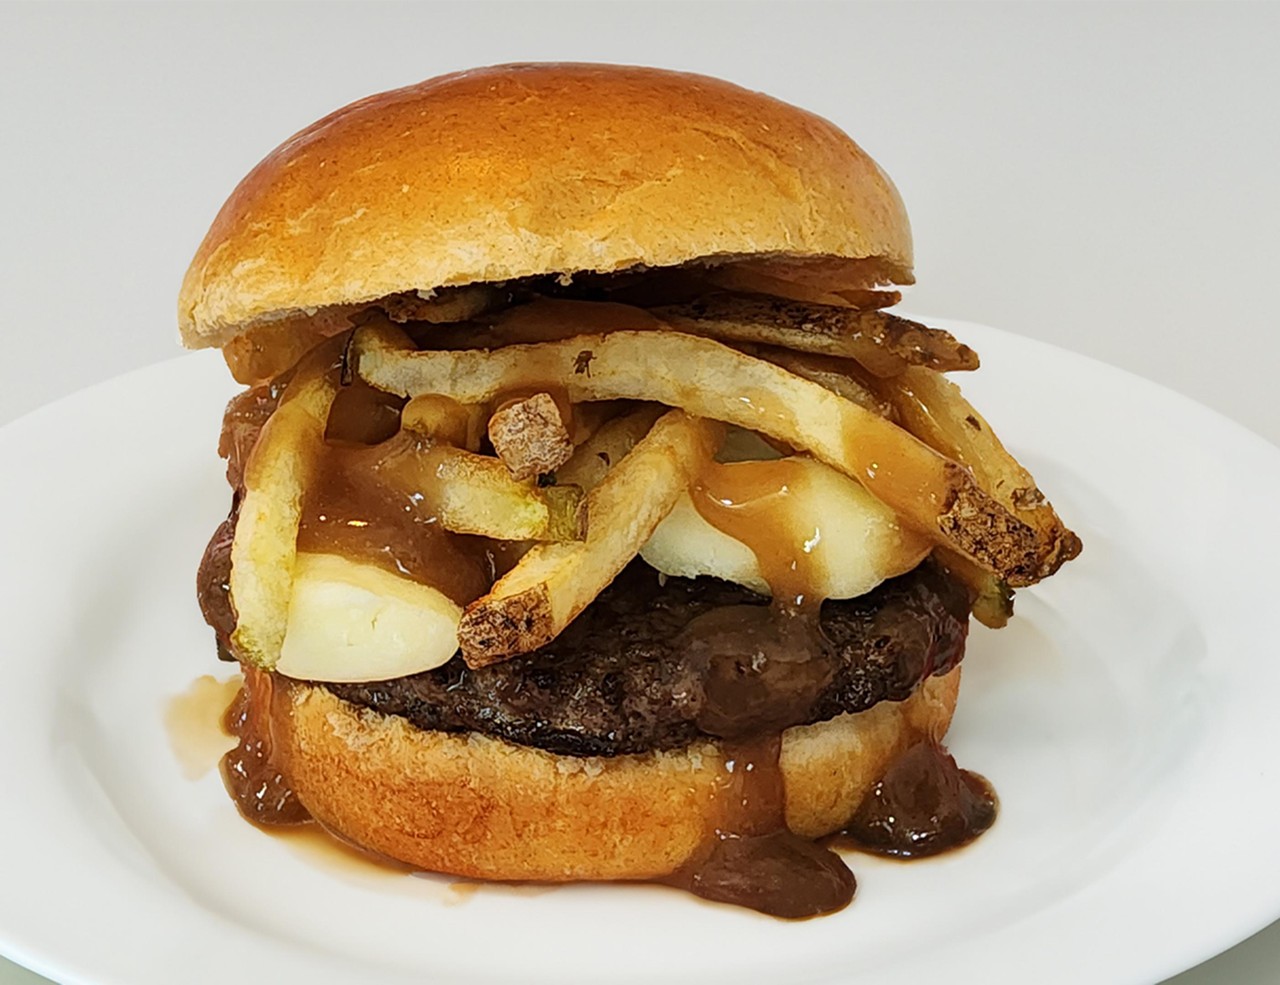 POUTINE BURGER
A flame grilled burger with fresh cut fries, warm cheese curds and topped with gravy served on a homemade bun.
DeAnna's Donut Burger